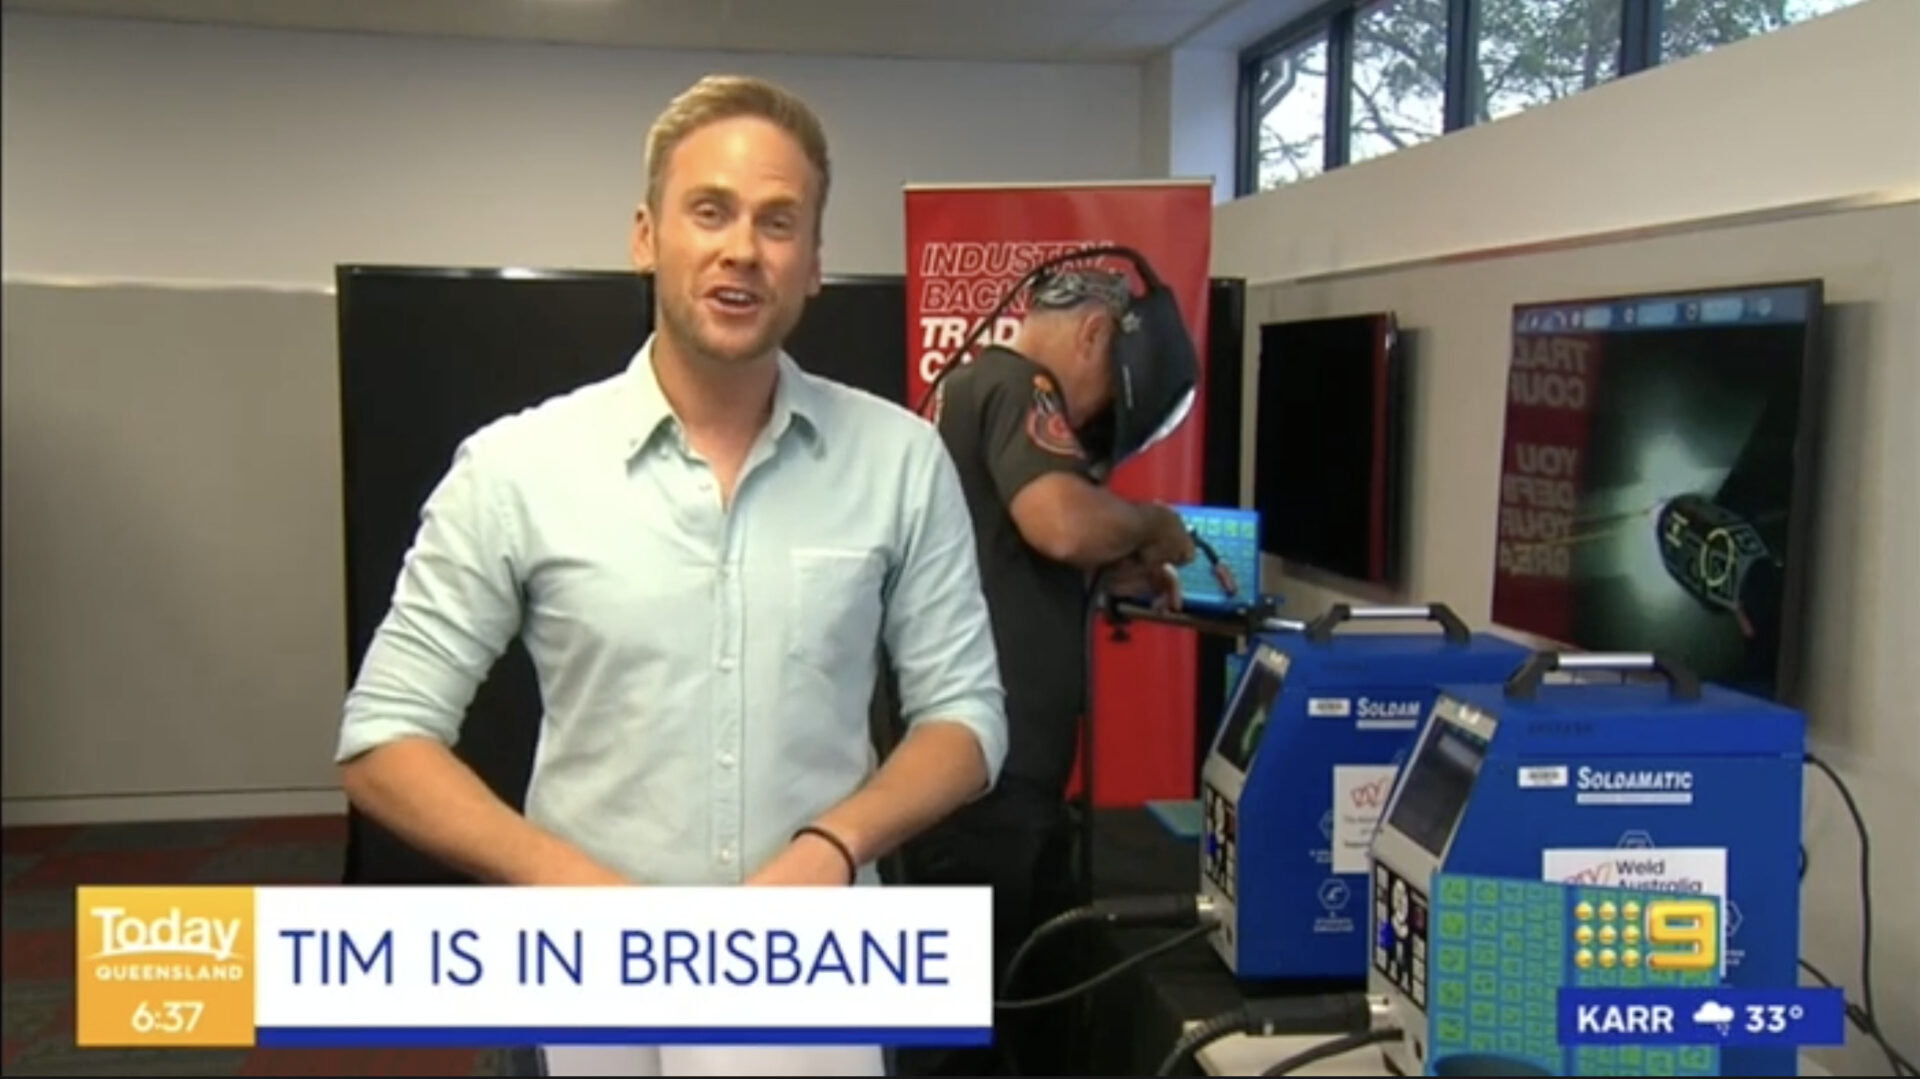 The Today Show: Upskilling the Tradies of the Future